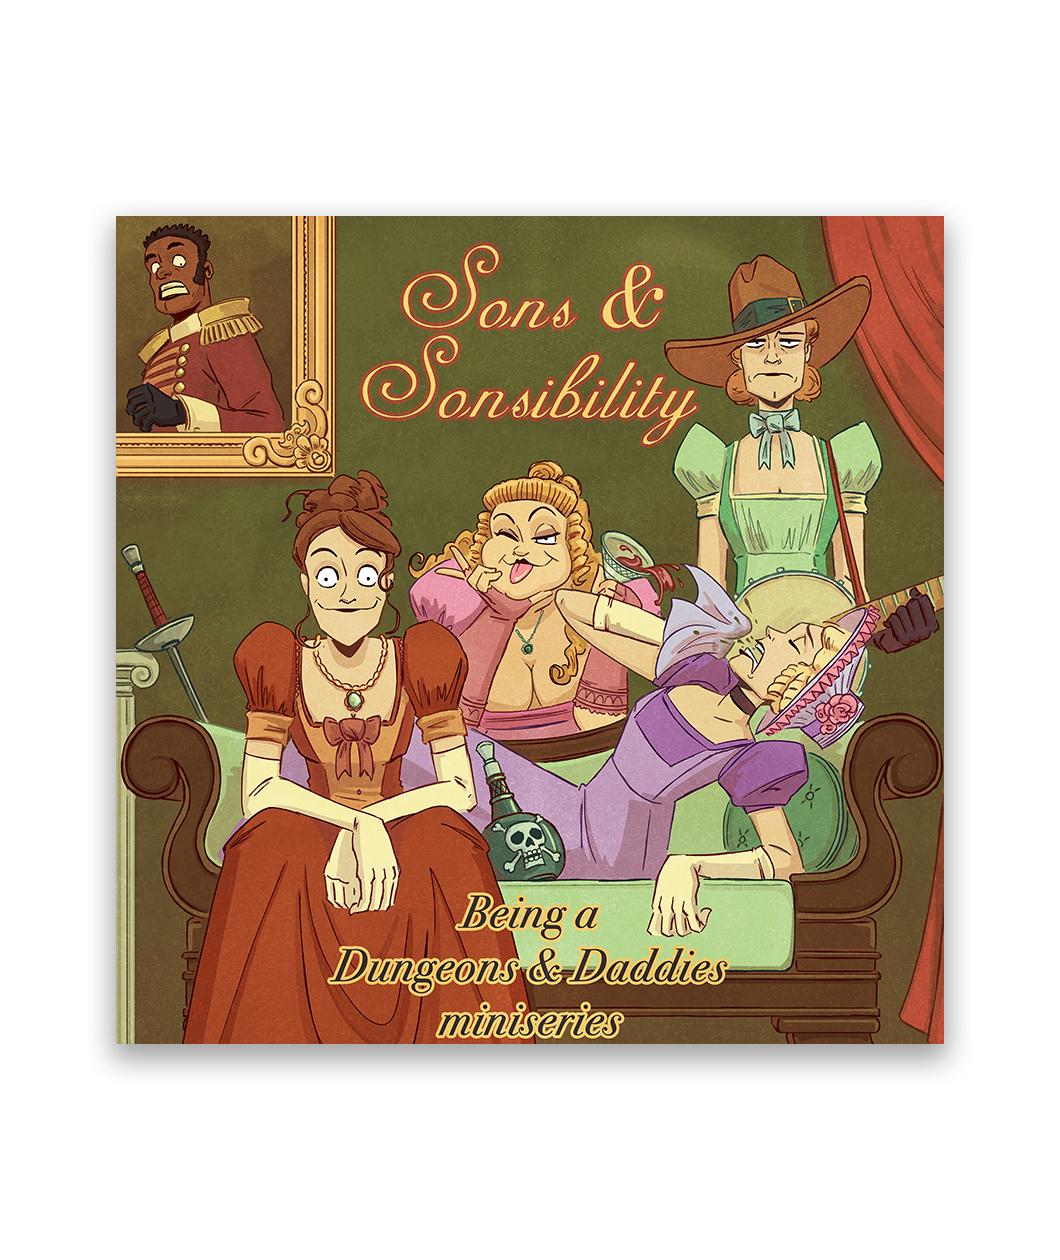 Cover art for Sons & Sonsability. There are four women in 19th century colorful dresses, one rusty red, one lavender, one pink, and one mint green. There is a prince in portrait behind them that looks disgusted. Text at the bottom of the cover says, "Being a Dungeons & Daddies miniseries".